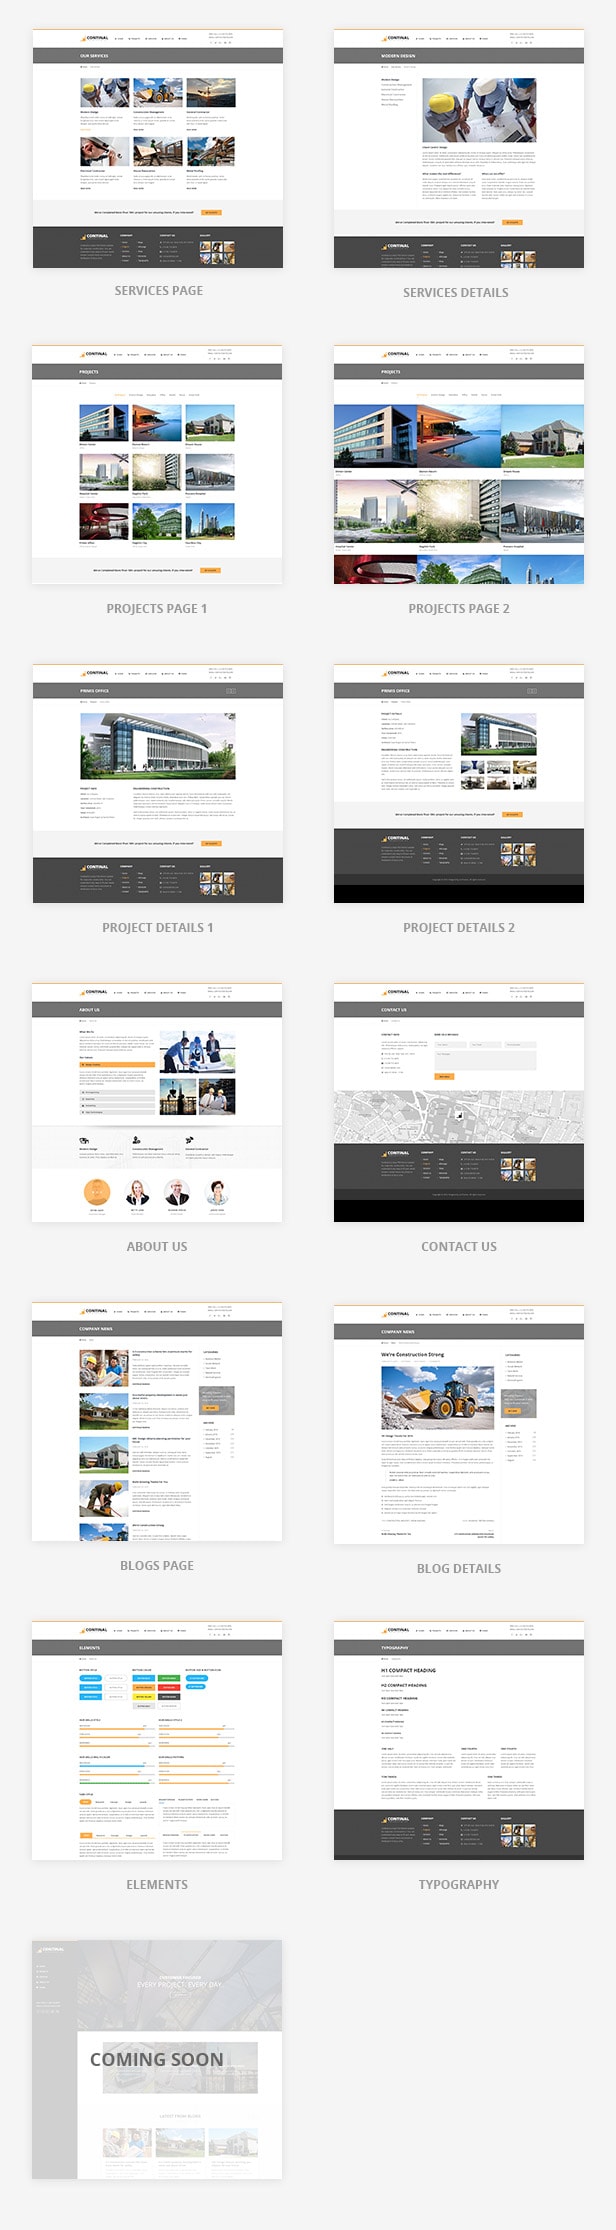 Continal - Construction Business HTML5 Template 3